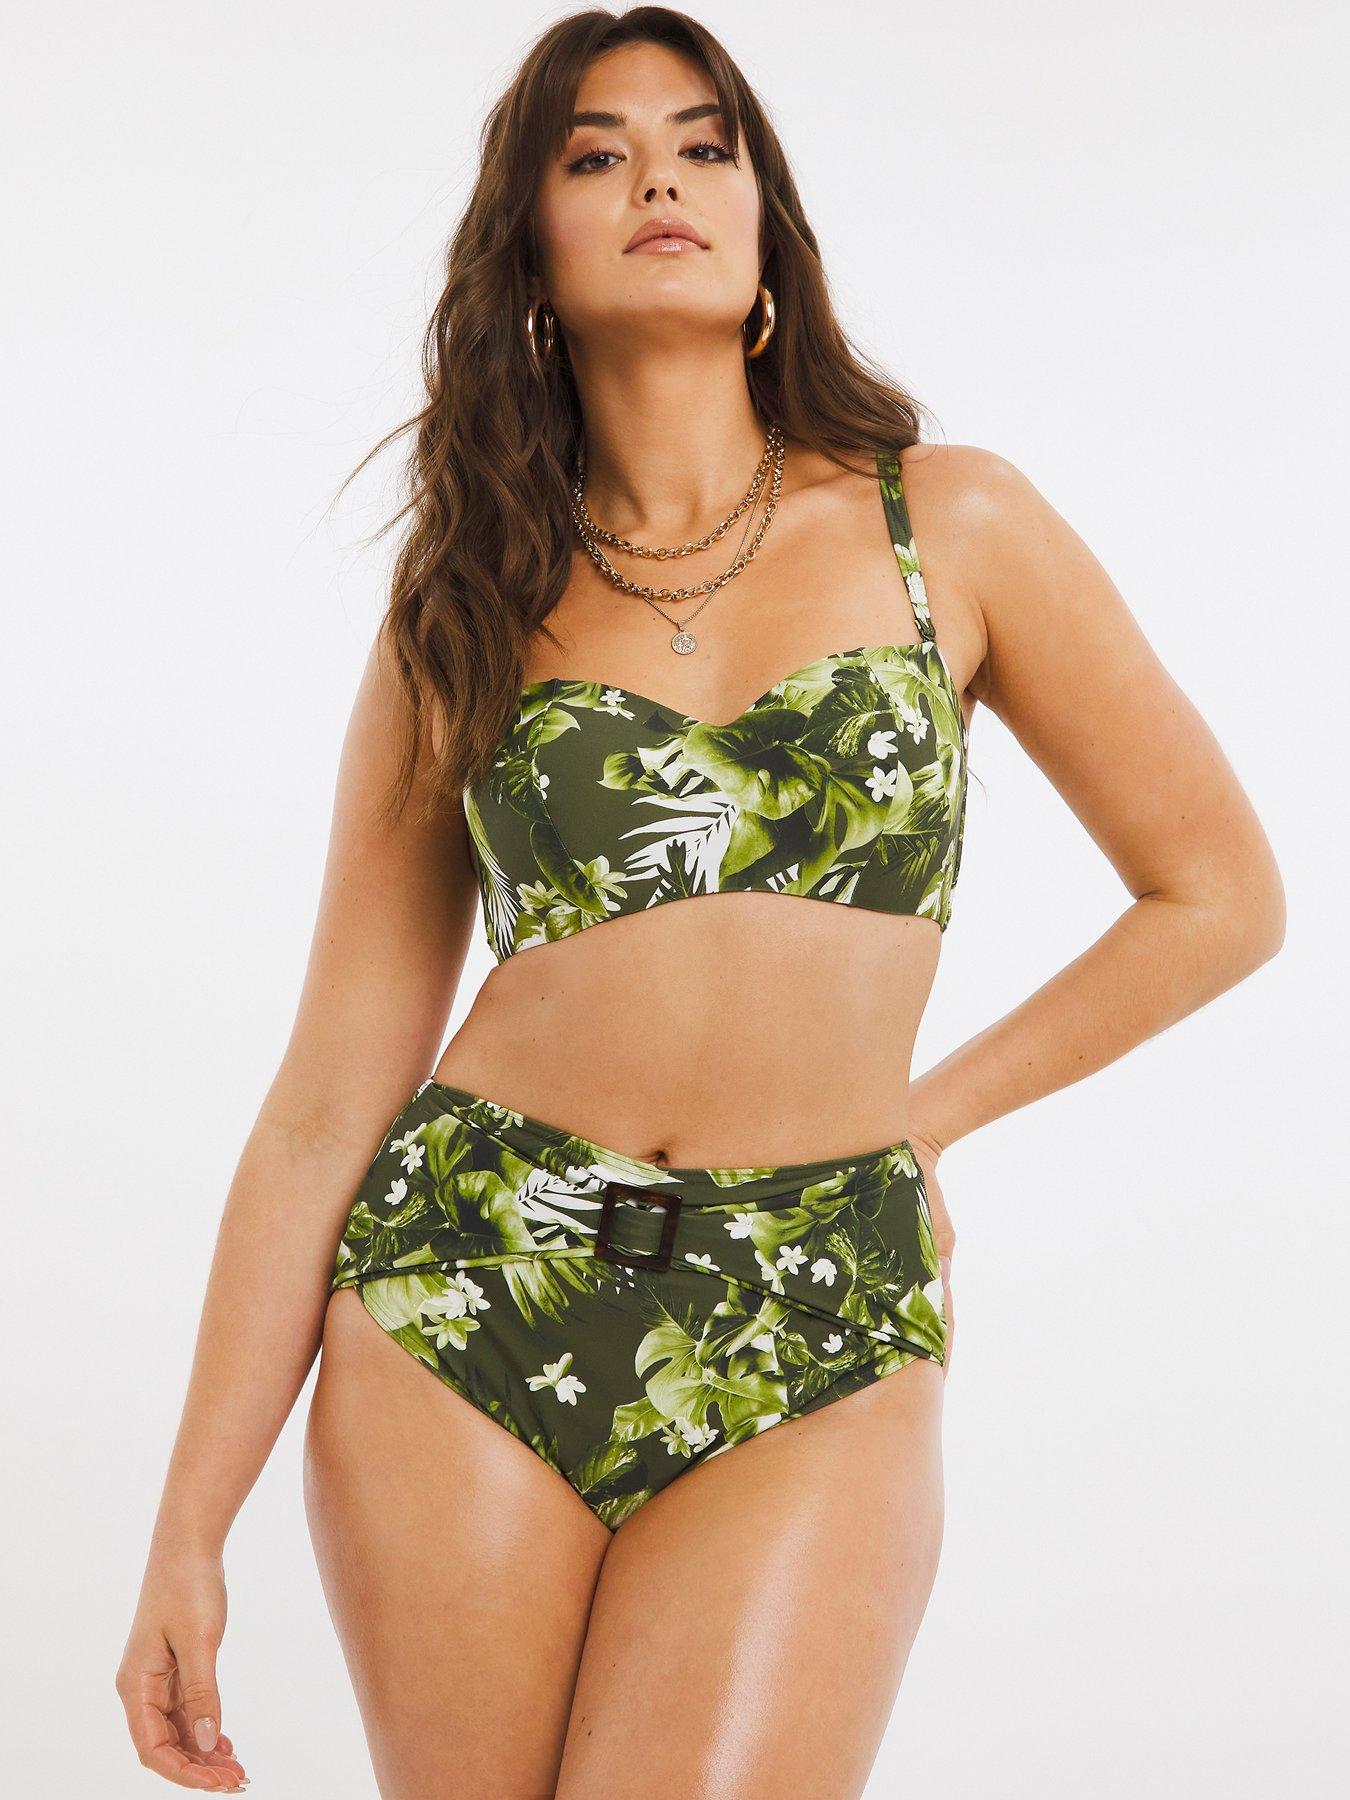 Figleaves Outlet Swimwear, Outlet